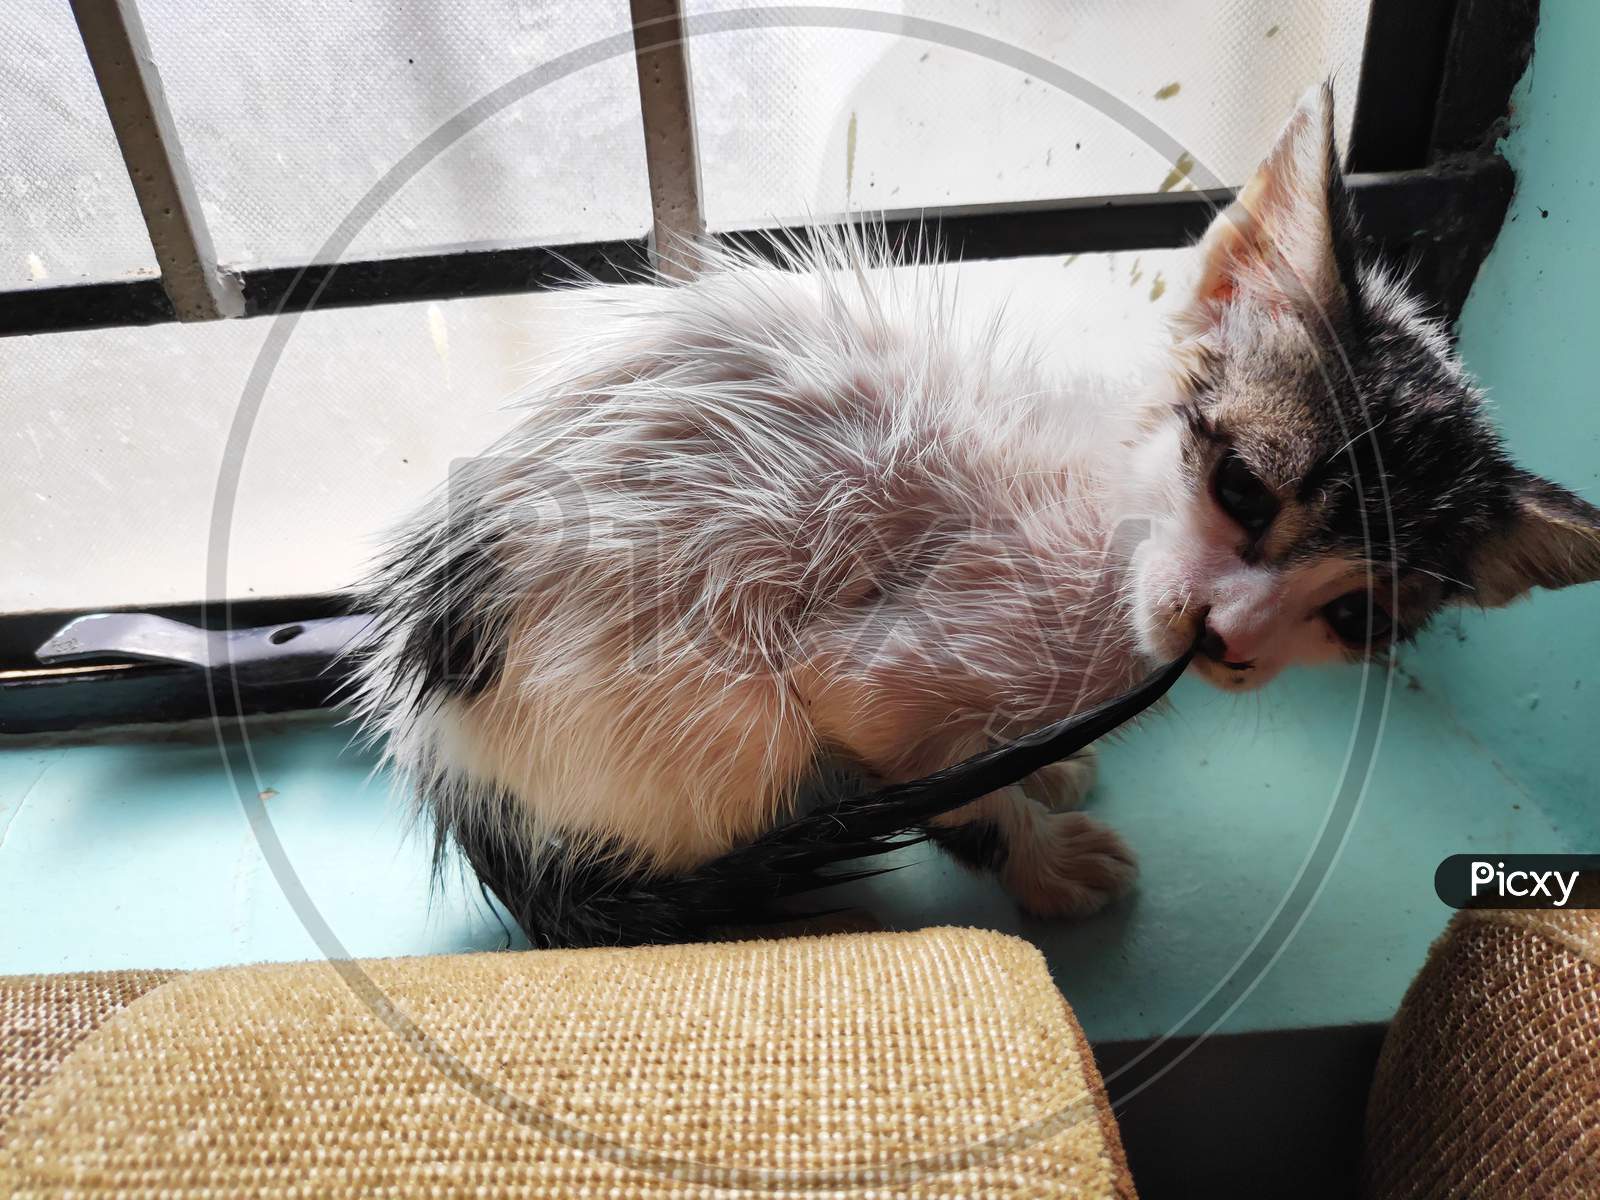 Small Kitten After Bath In Window With Wet Hairs